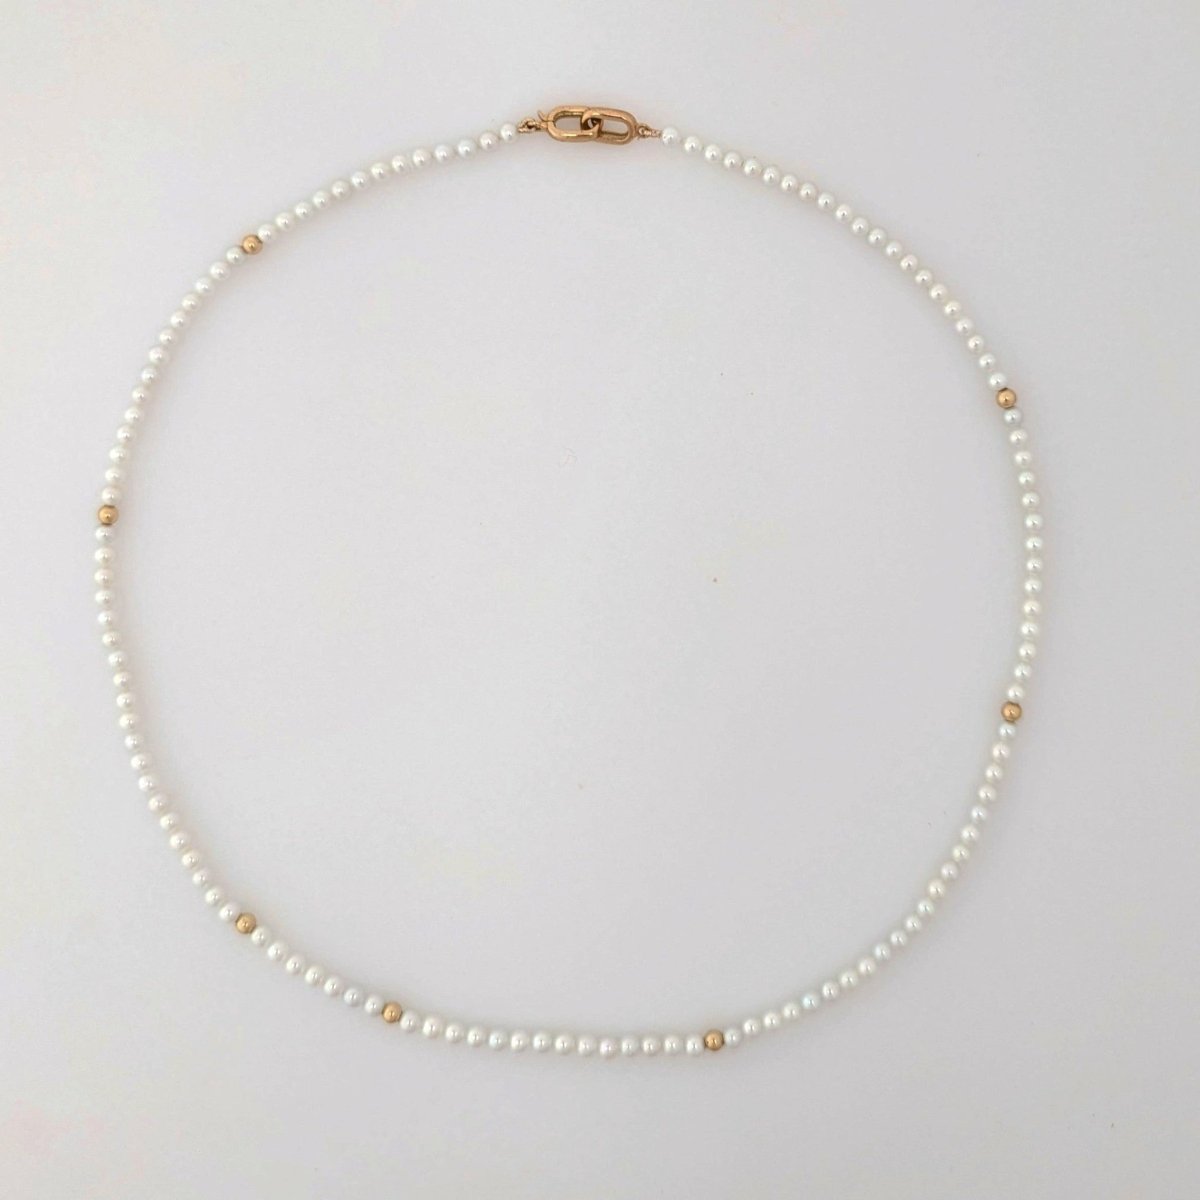 White Seed Bead Nucleated Freshwater Pearl Necklace w/Gold Beads - Marina Korneev Fine Pearls